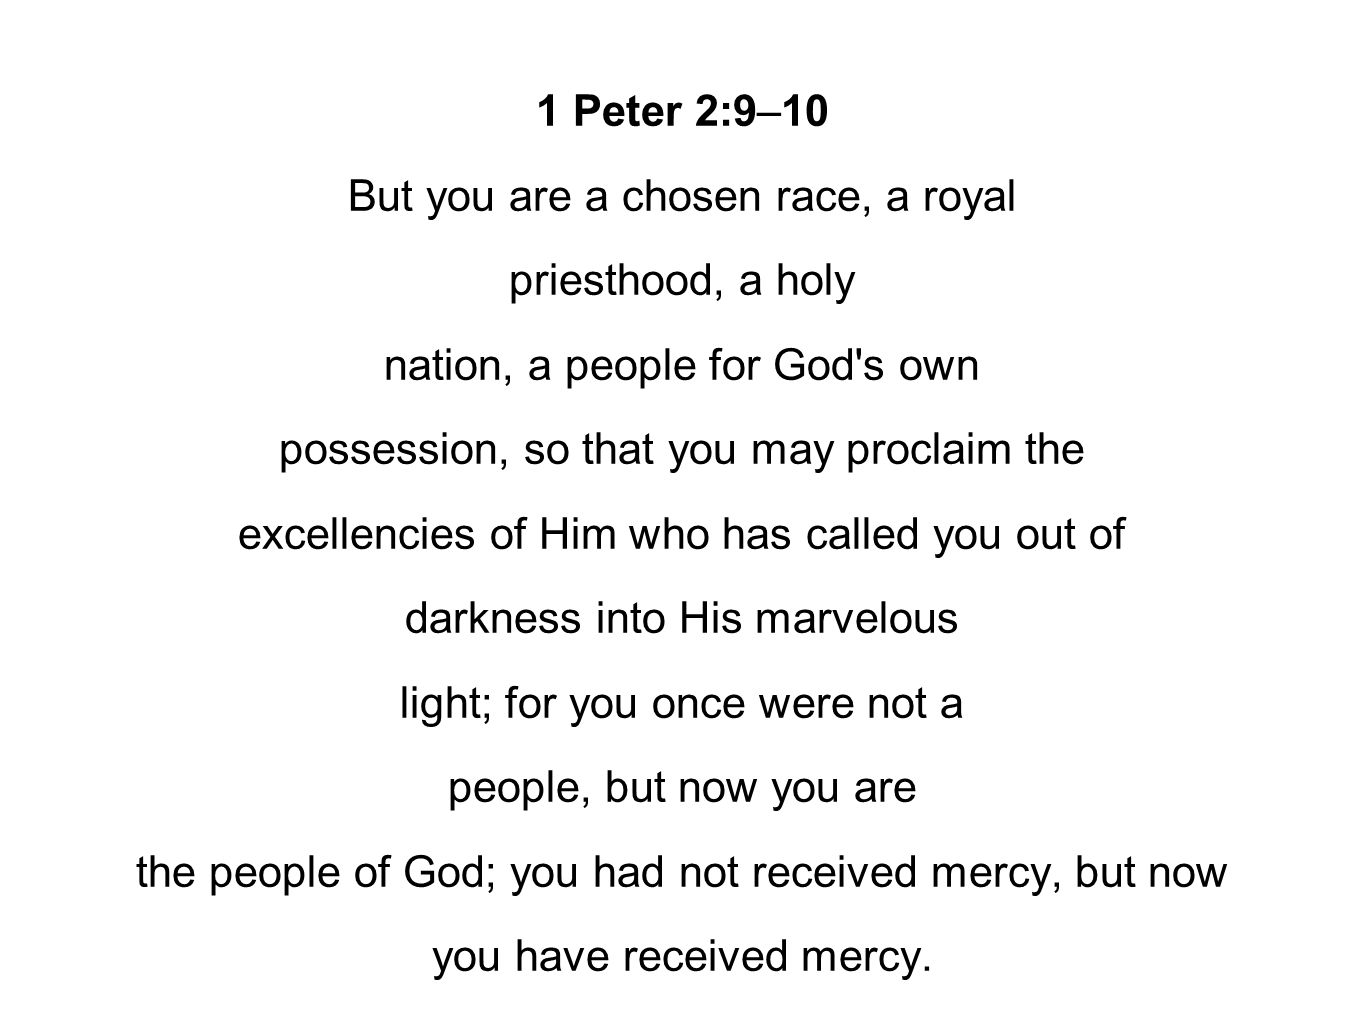 1 Peter 2:9–10 But you are a chosen race, a royal priesthood, a holy nation, a people for God s own possession, so that you may proclaim the excellencies of Him who has called you out of darkness into His marvelous light; for you once were not a people, but now you are the people of God; you had not received mercy, but now you have received mercy.